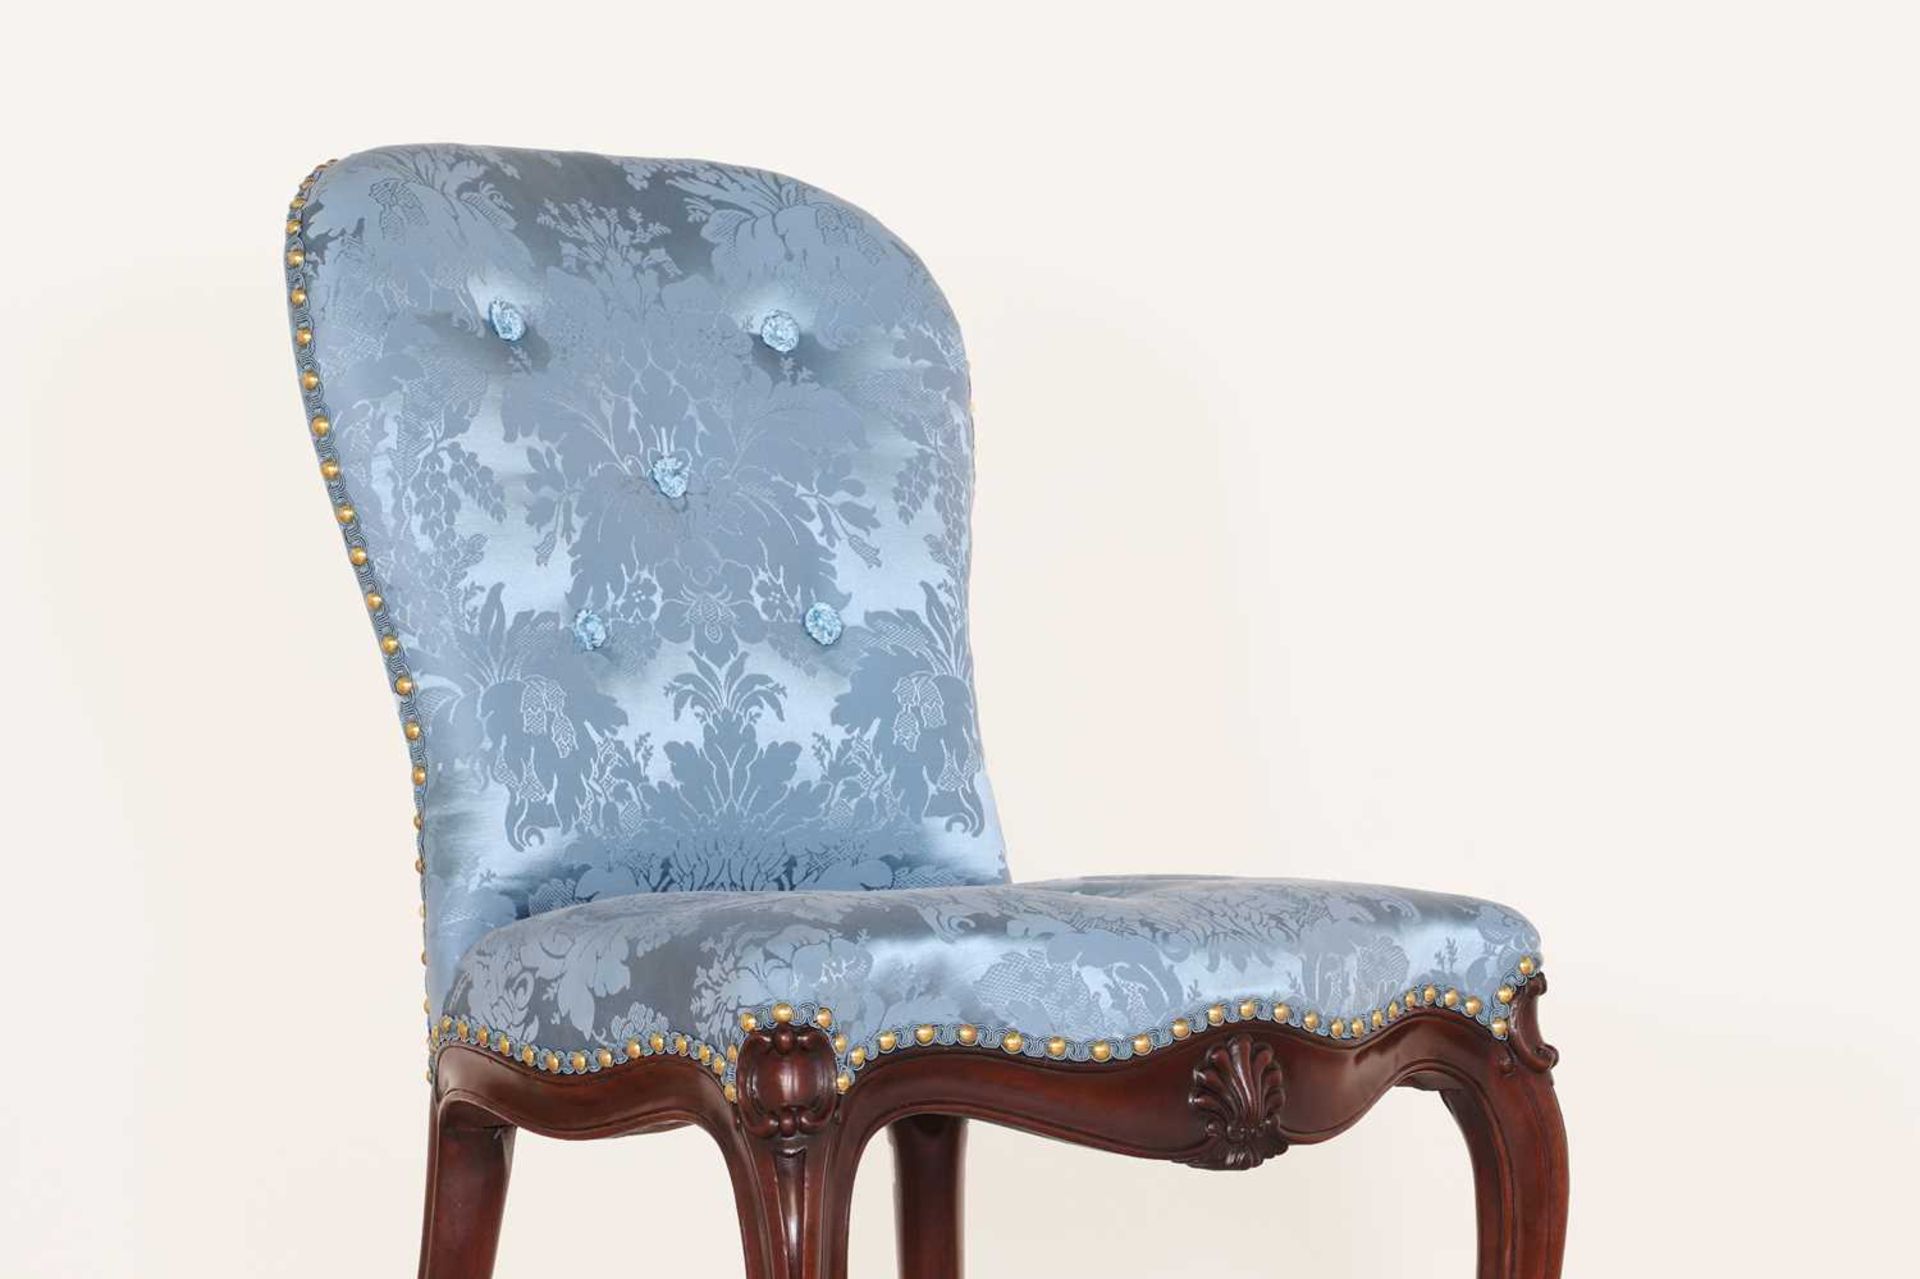 A George III mahogany side chair attributed to Thomas Chippendale - Image 9 of 53